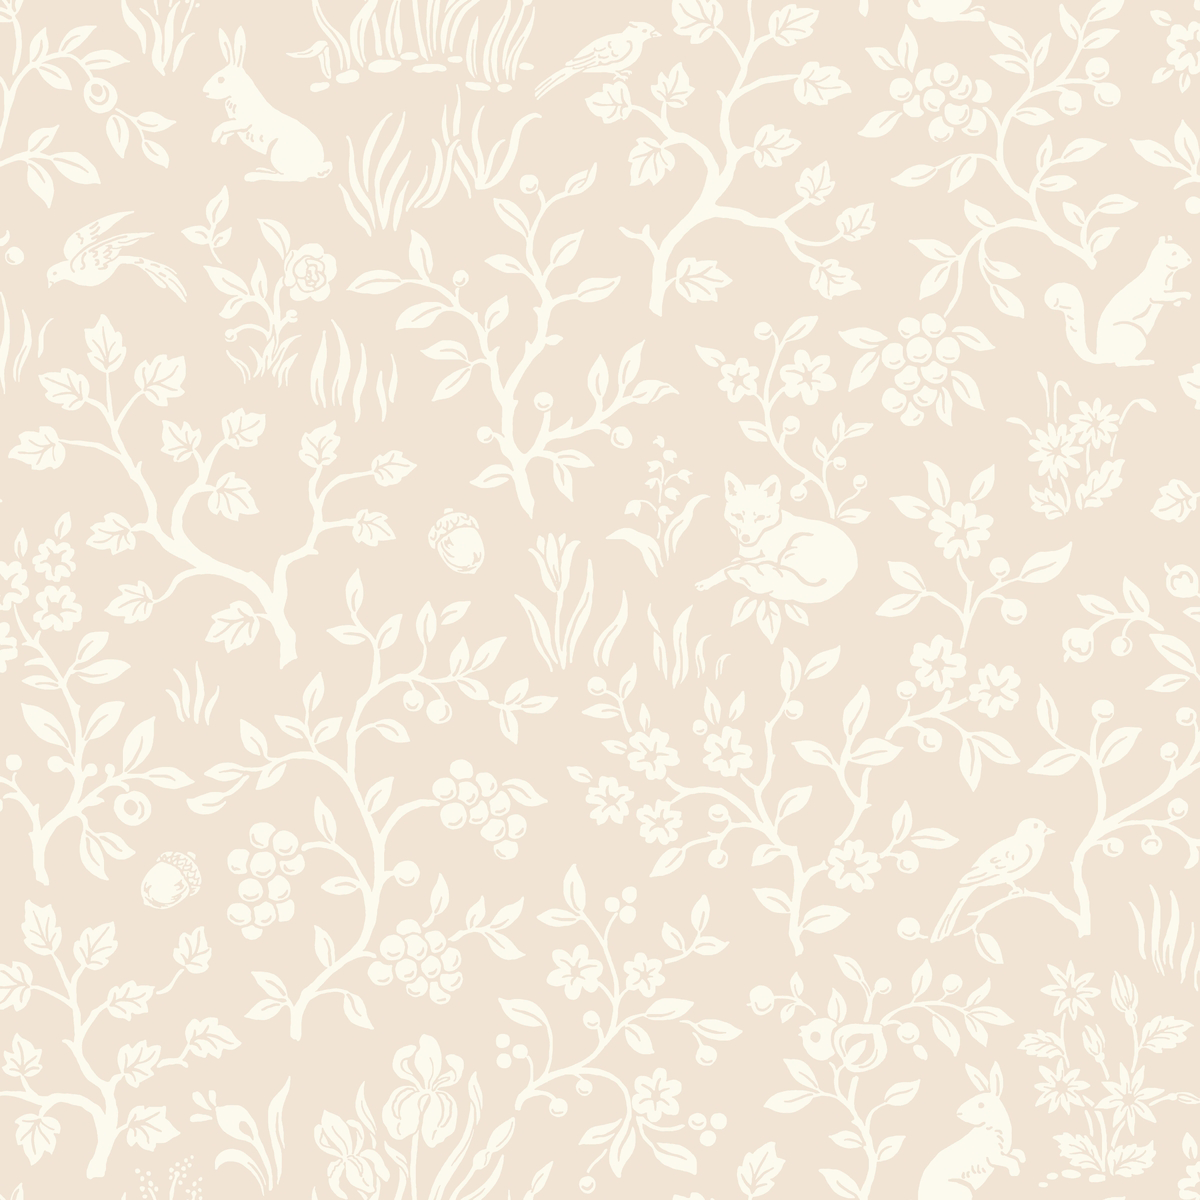 Magnolia Home Fox and Hare Wallpaper - SAMPLE SWATCH ONLY